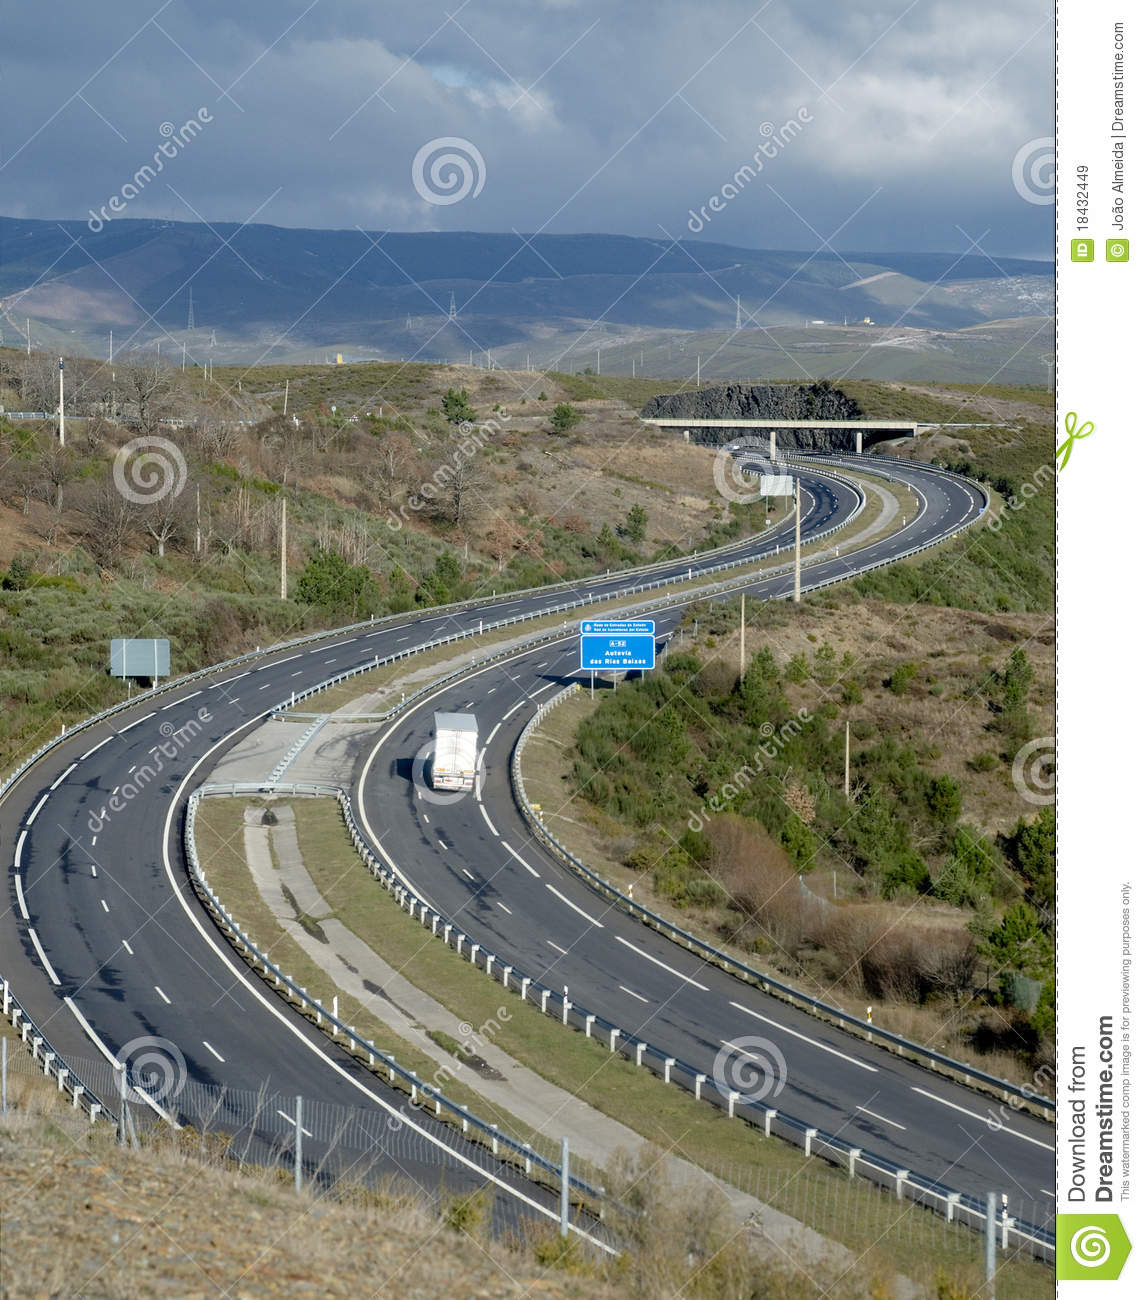 Curvy Highway Royalty Free Stock Images   Image  18432449